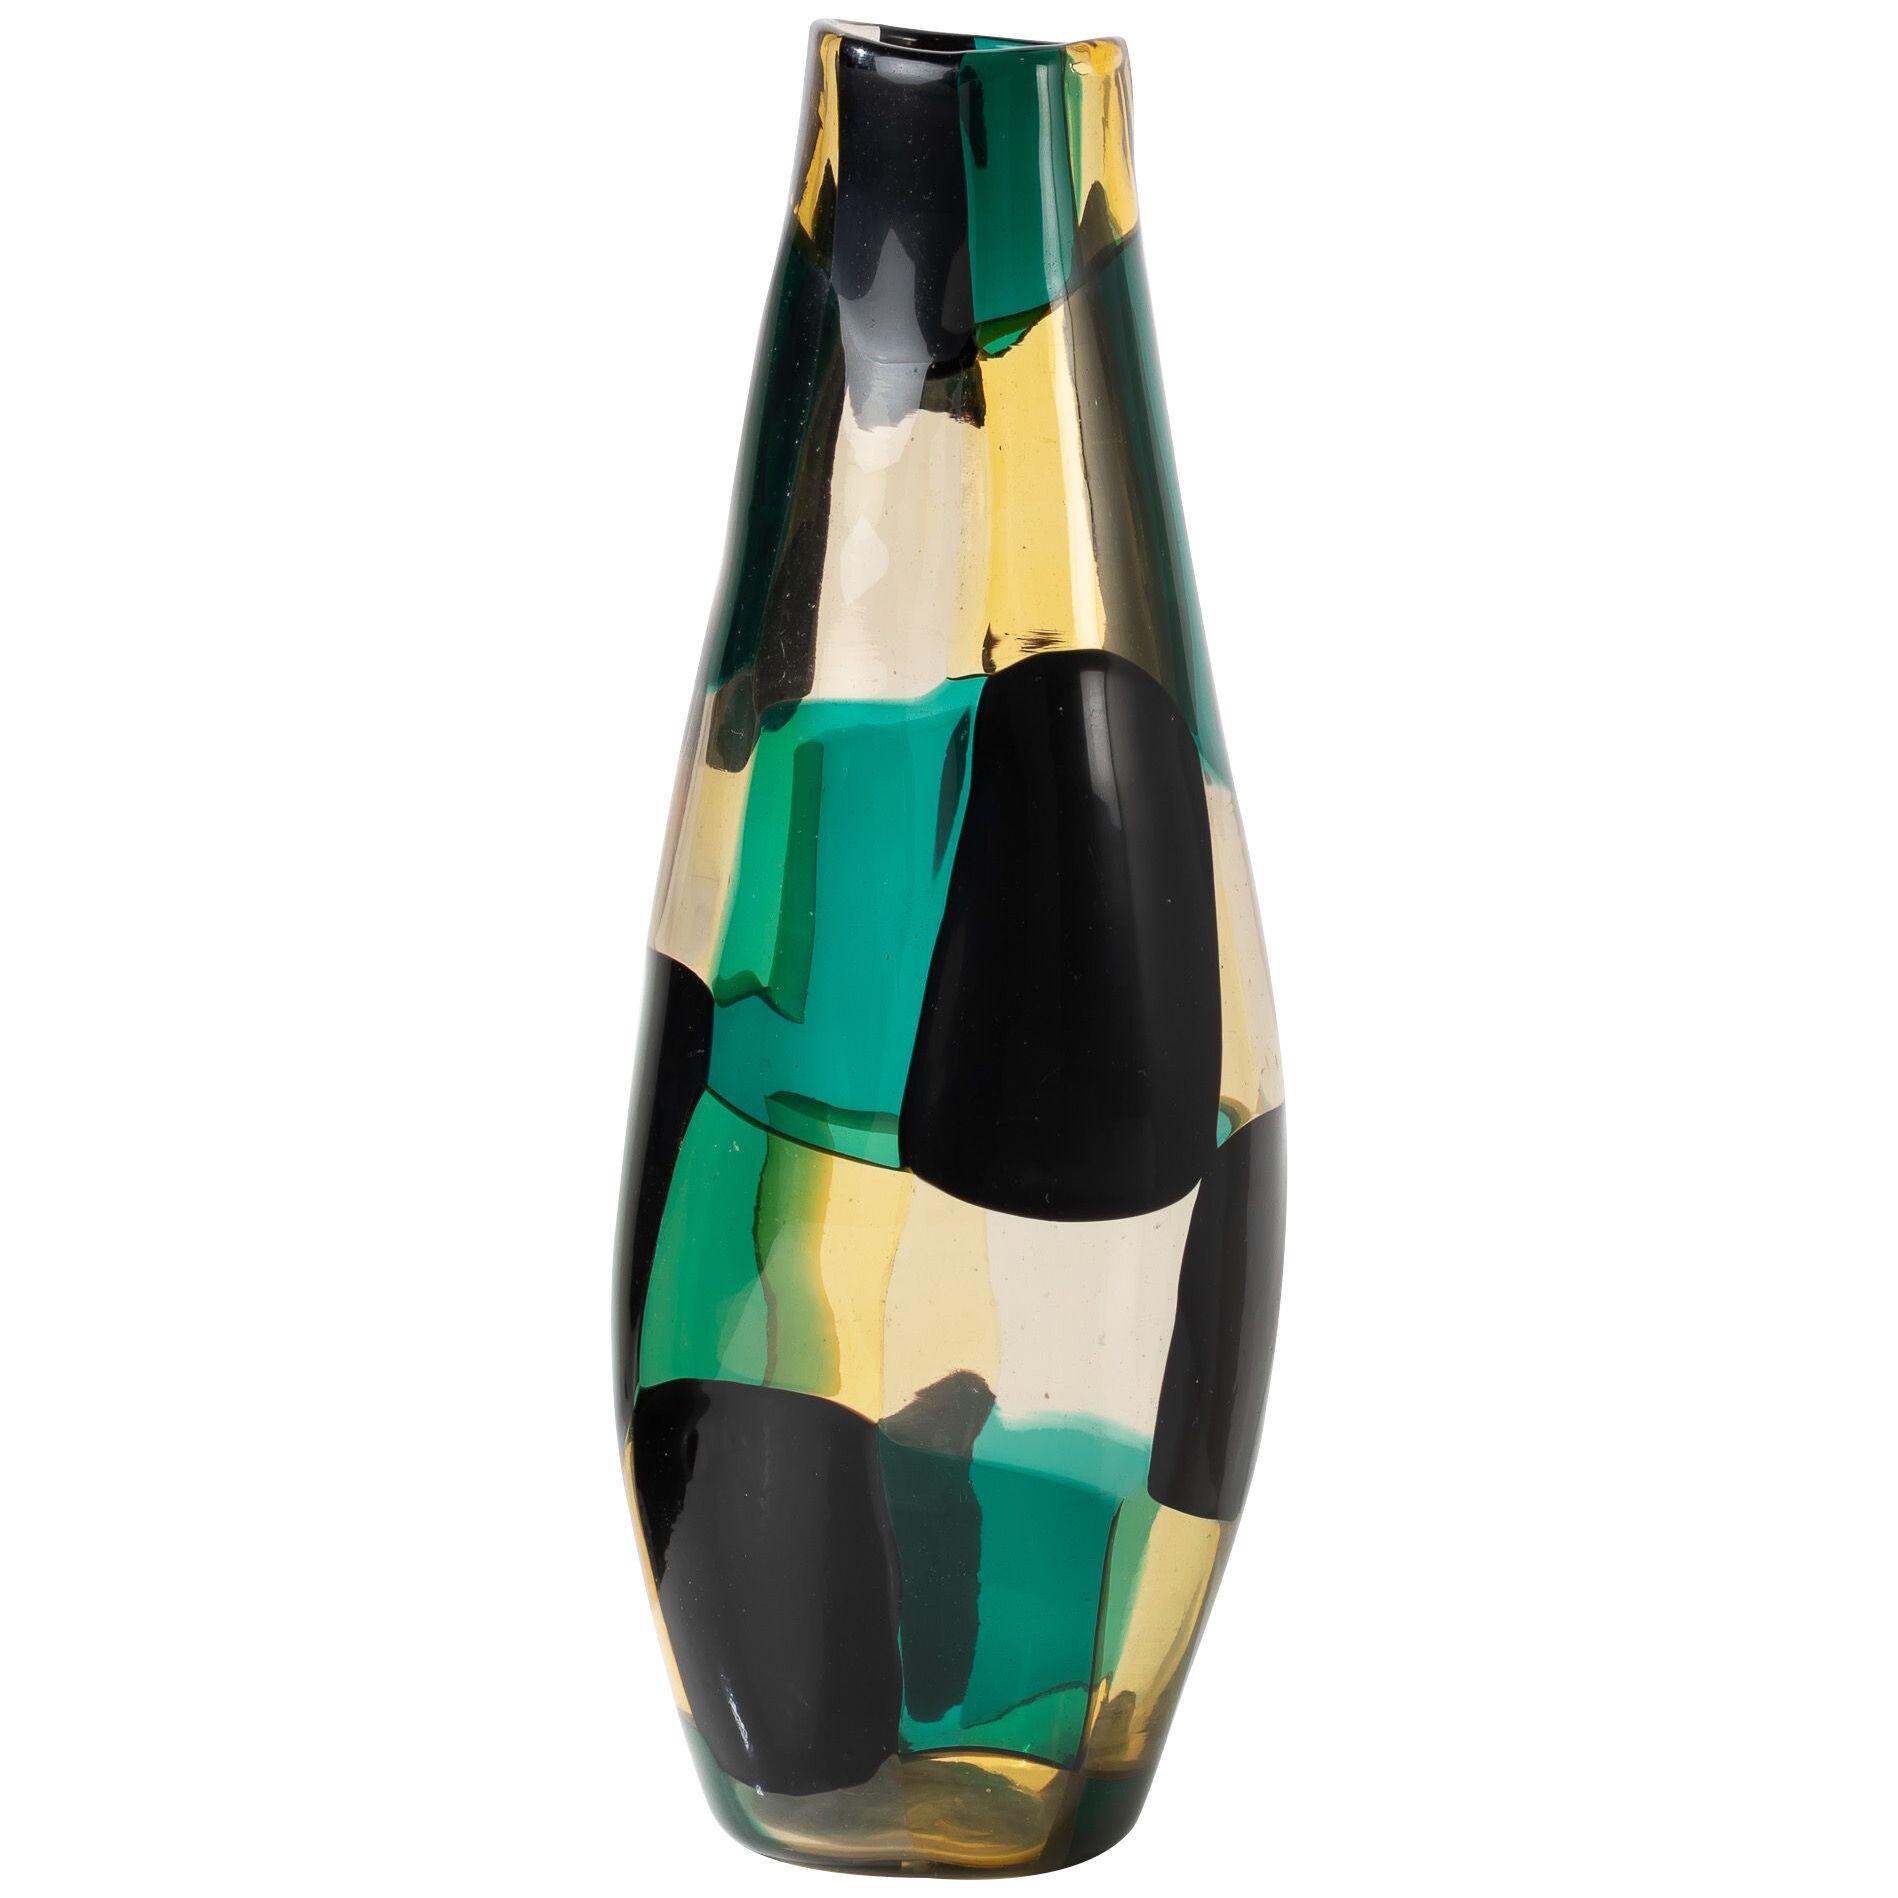 Vase from the “pezzato” series (referenced under number 4393) by Fulvio Bianconi